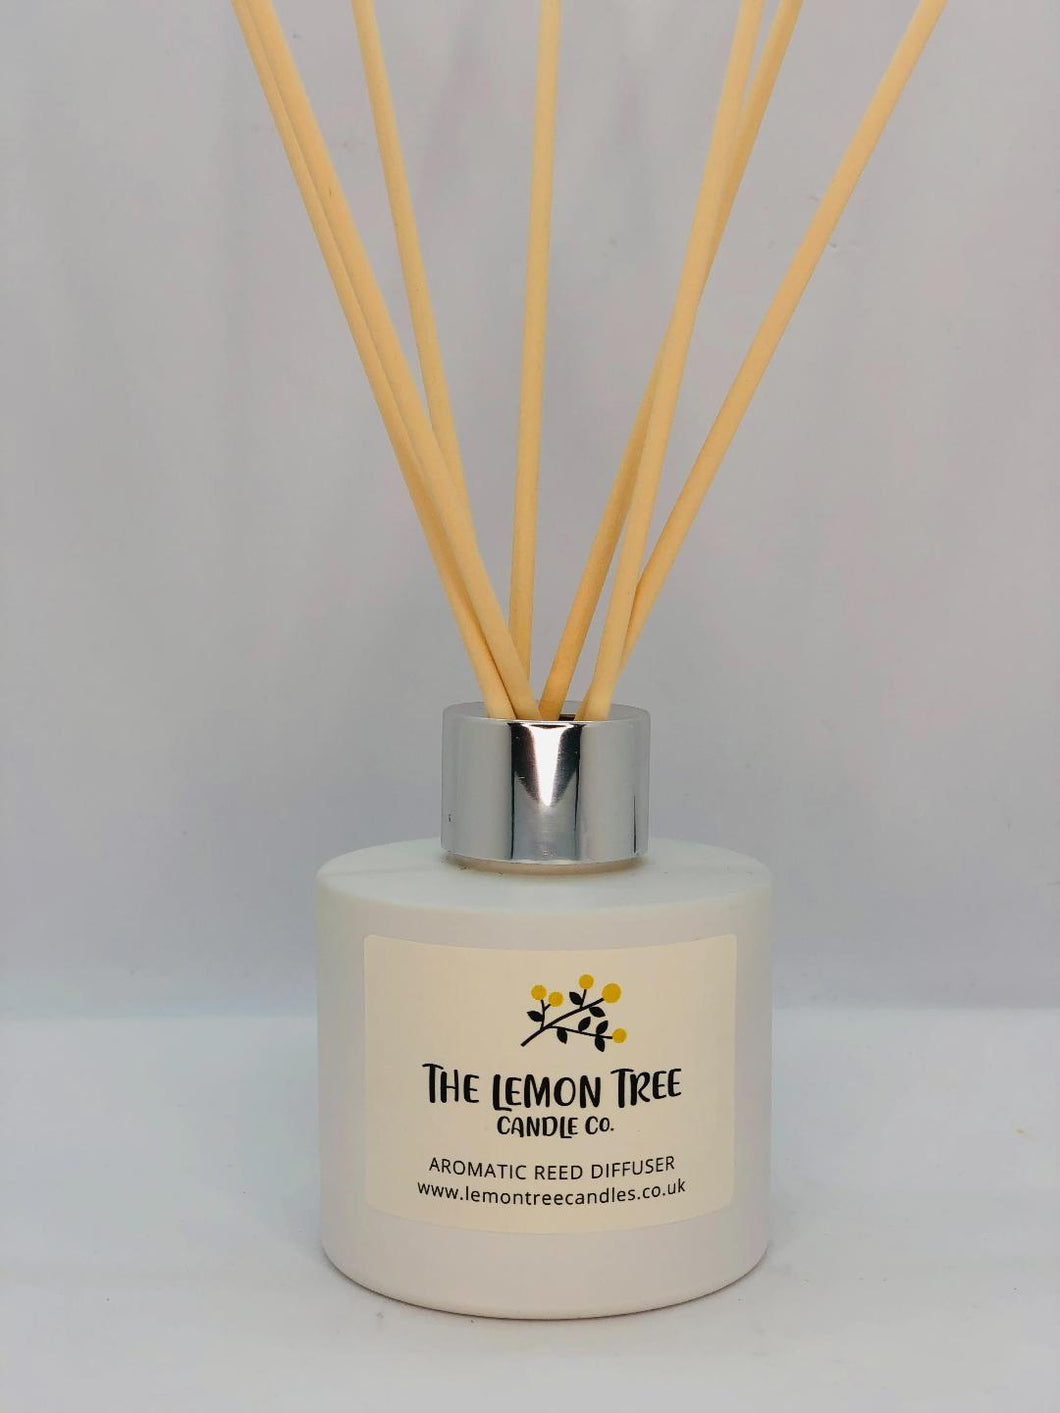 Thai Lime and Mango White Glass Diffuser - The Lemon Tree Candle Company